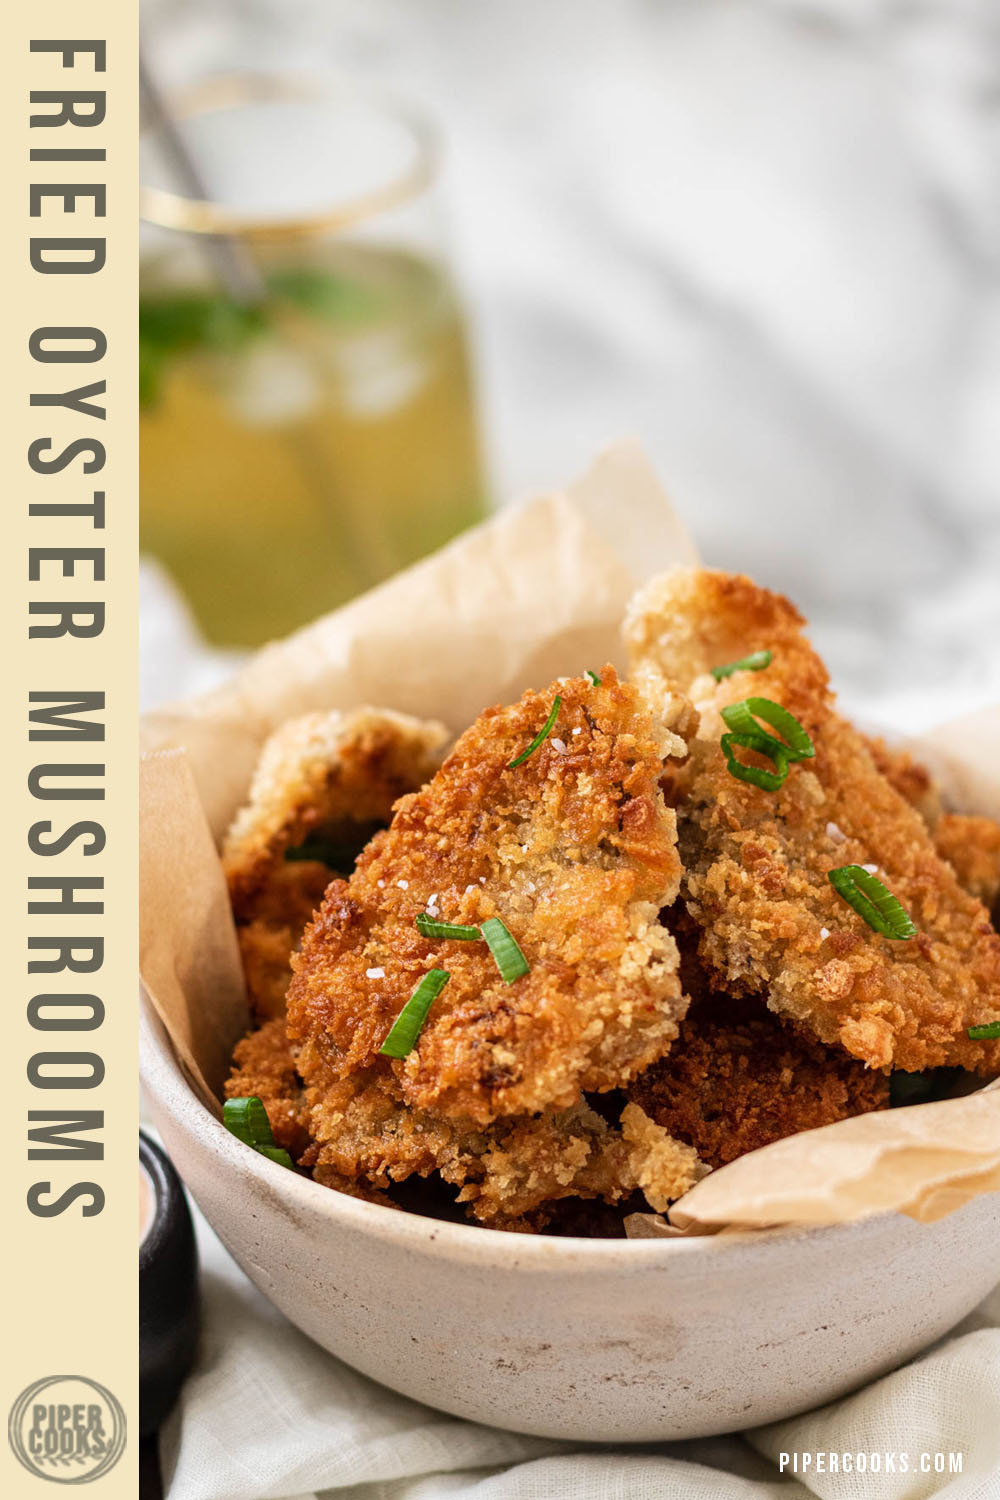 fried oyster mushrooms in a bowl with a text title overlay for Pinterest.